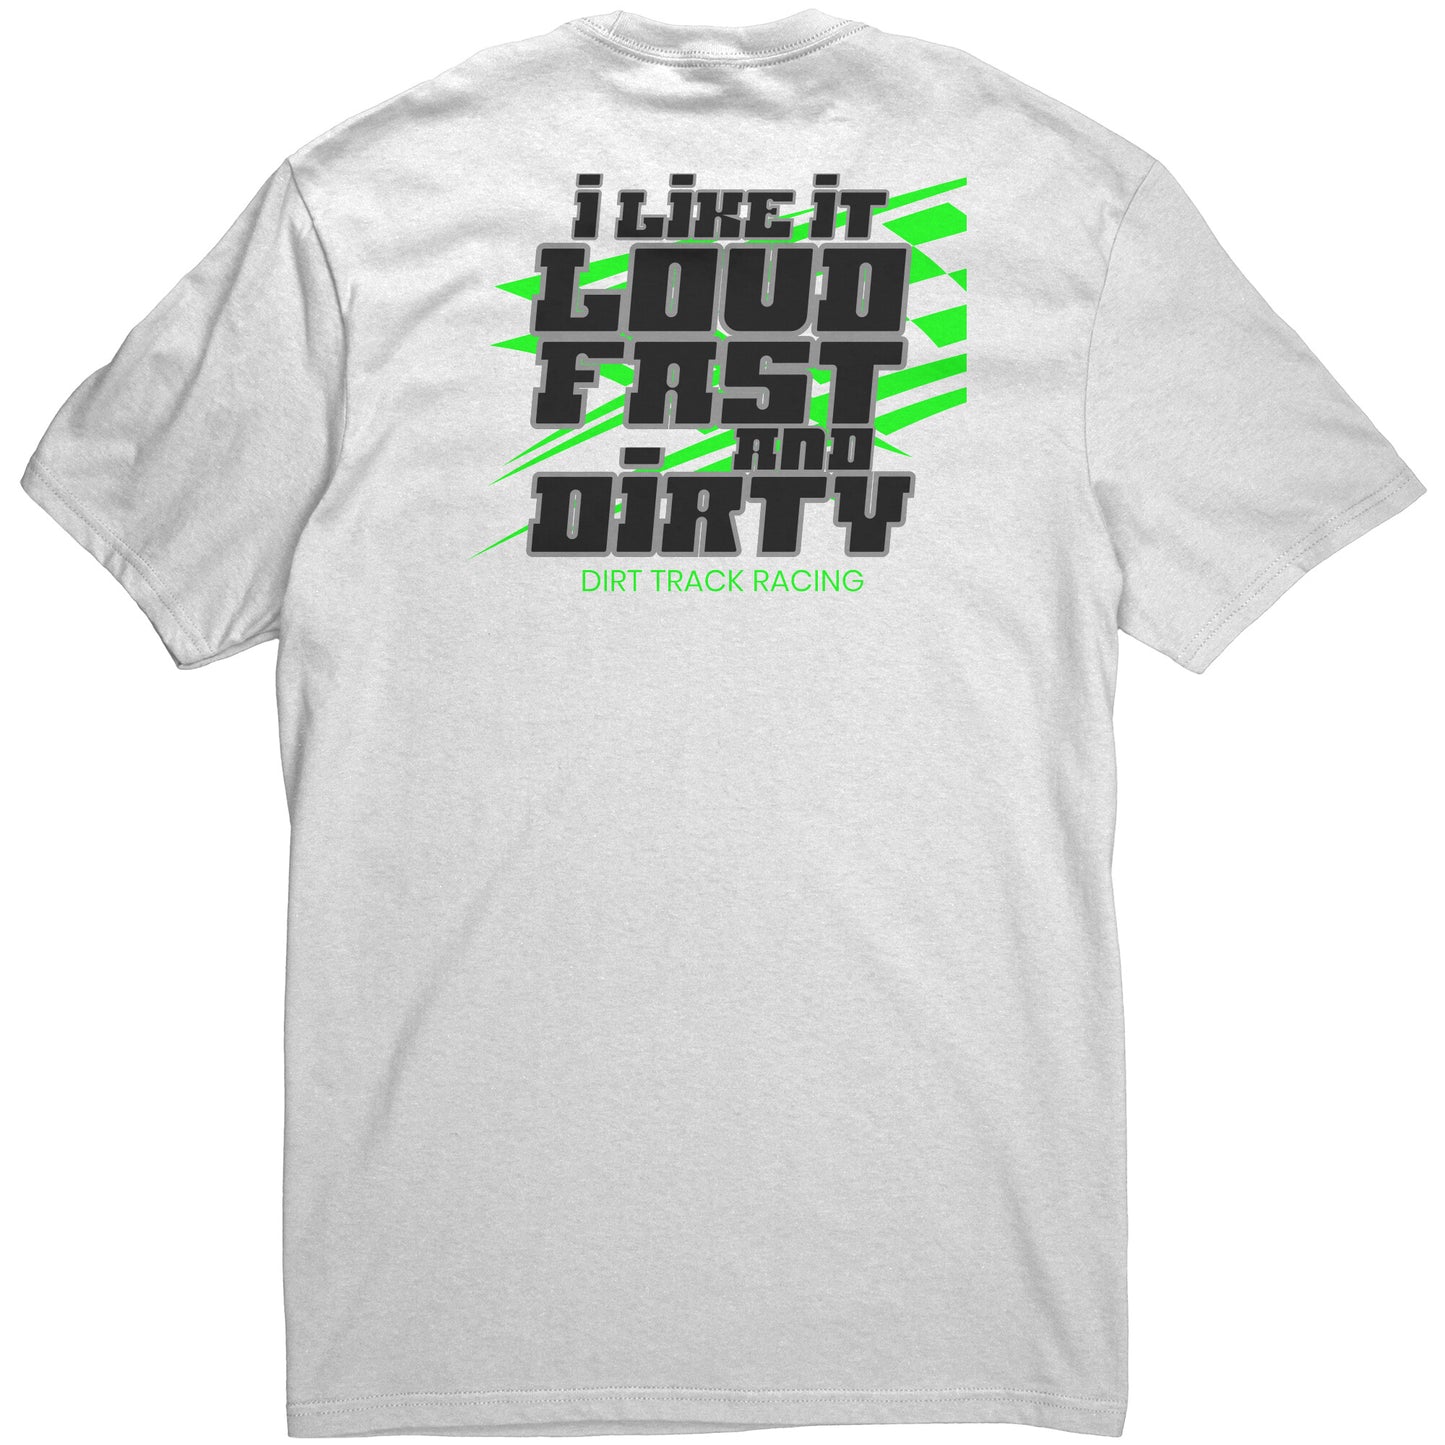 I Like It Loud Fast And Dirty Backside Race Graphic Men's T-SHirt